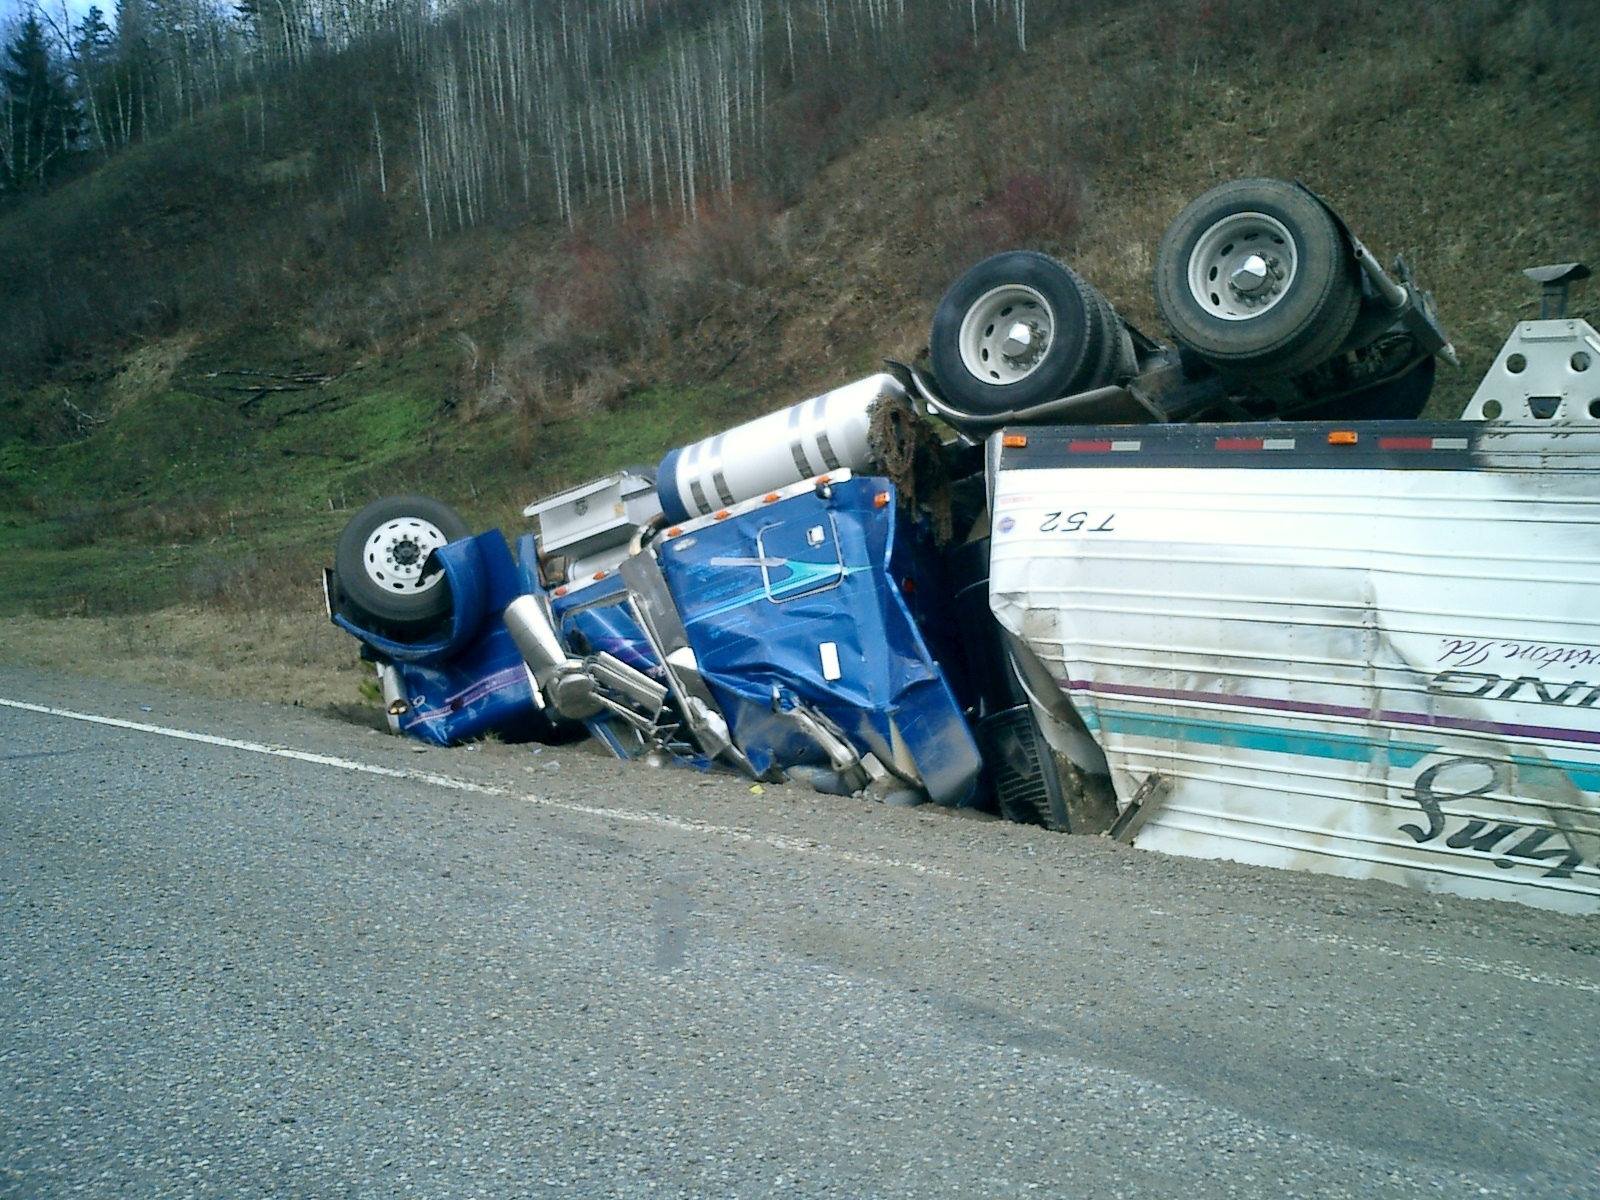 Truck Safety is Getting Worse. Congress Isn’t Helping (Shock).